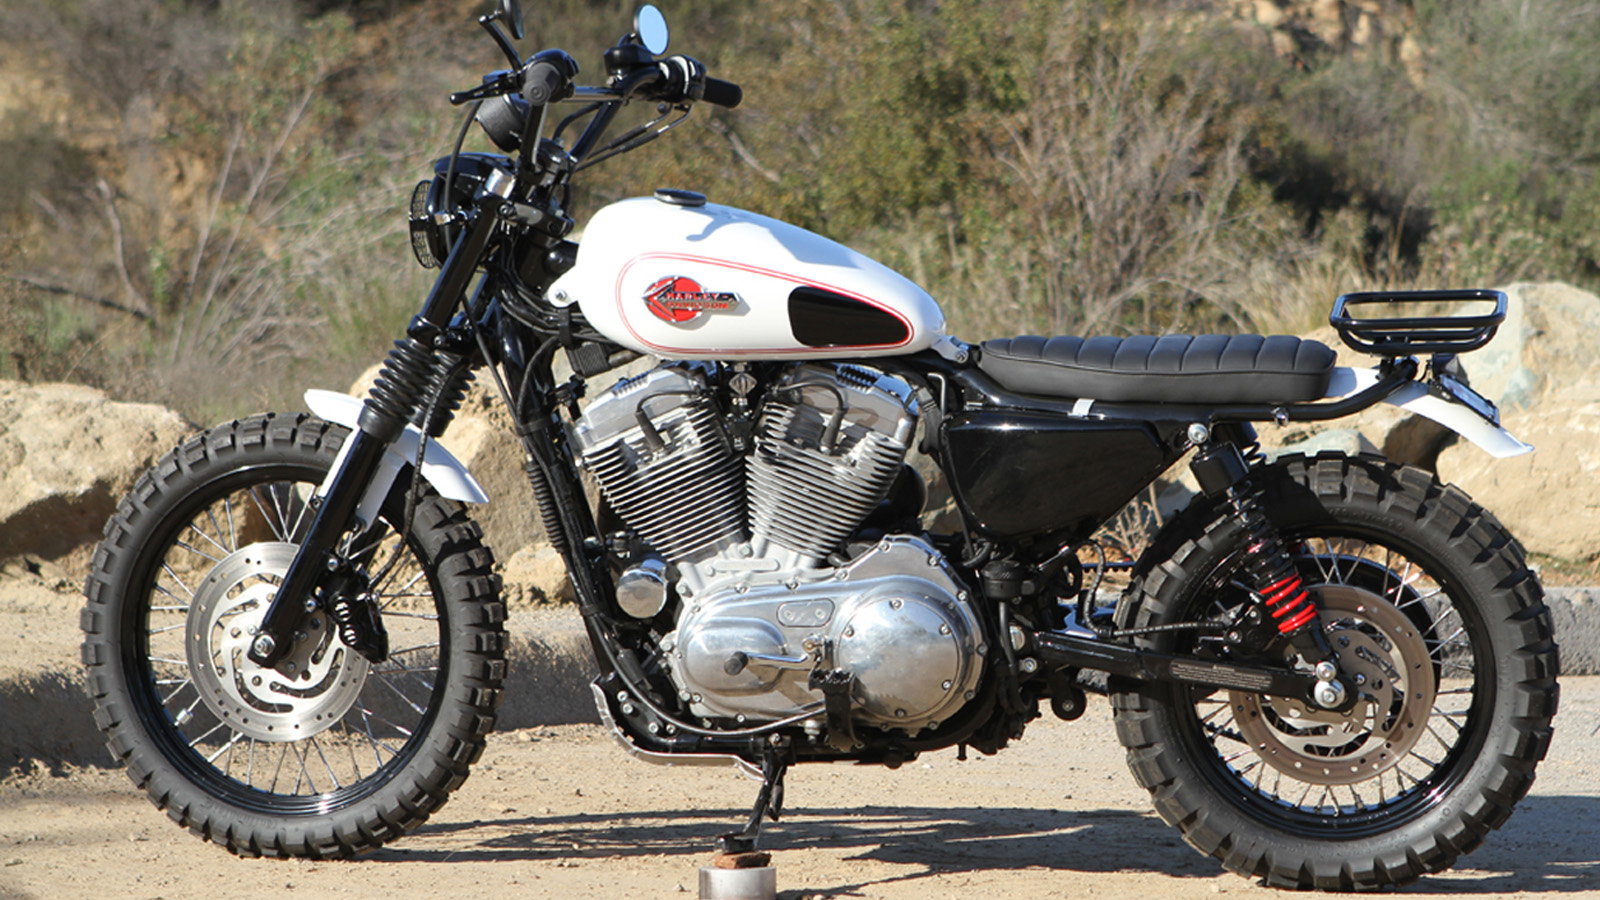 Brutester: An animalistic Harley Sportster 883 scrambler from